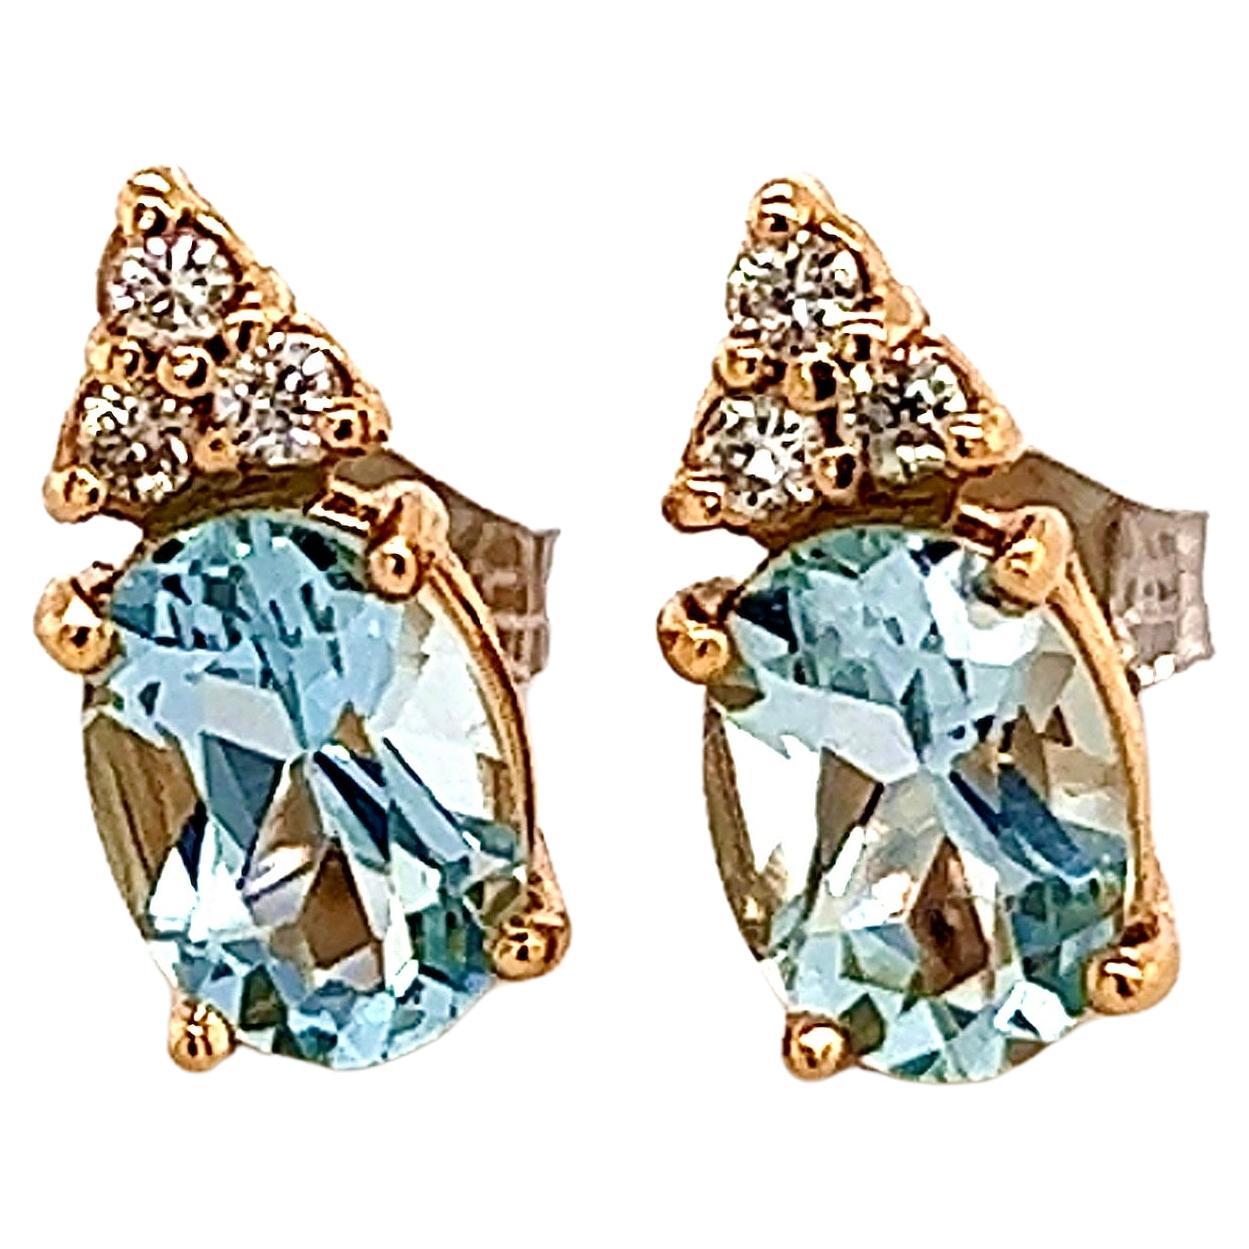 Natural Aquamarine Diamond Earrings 14k Y Gold 1.85 TCW Certified For Sale